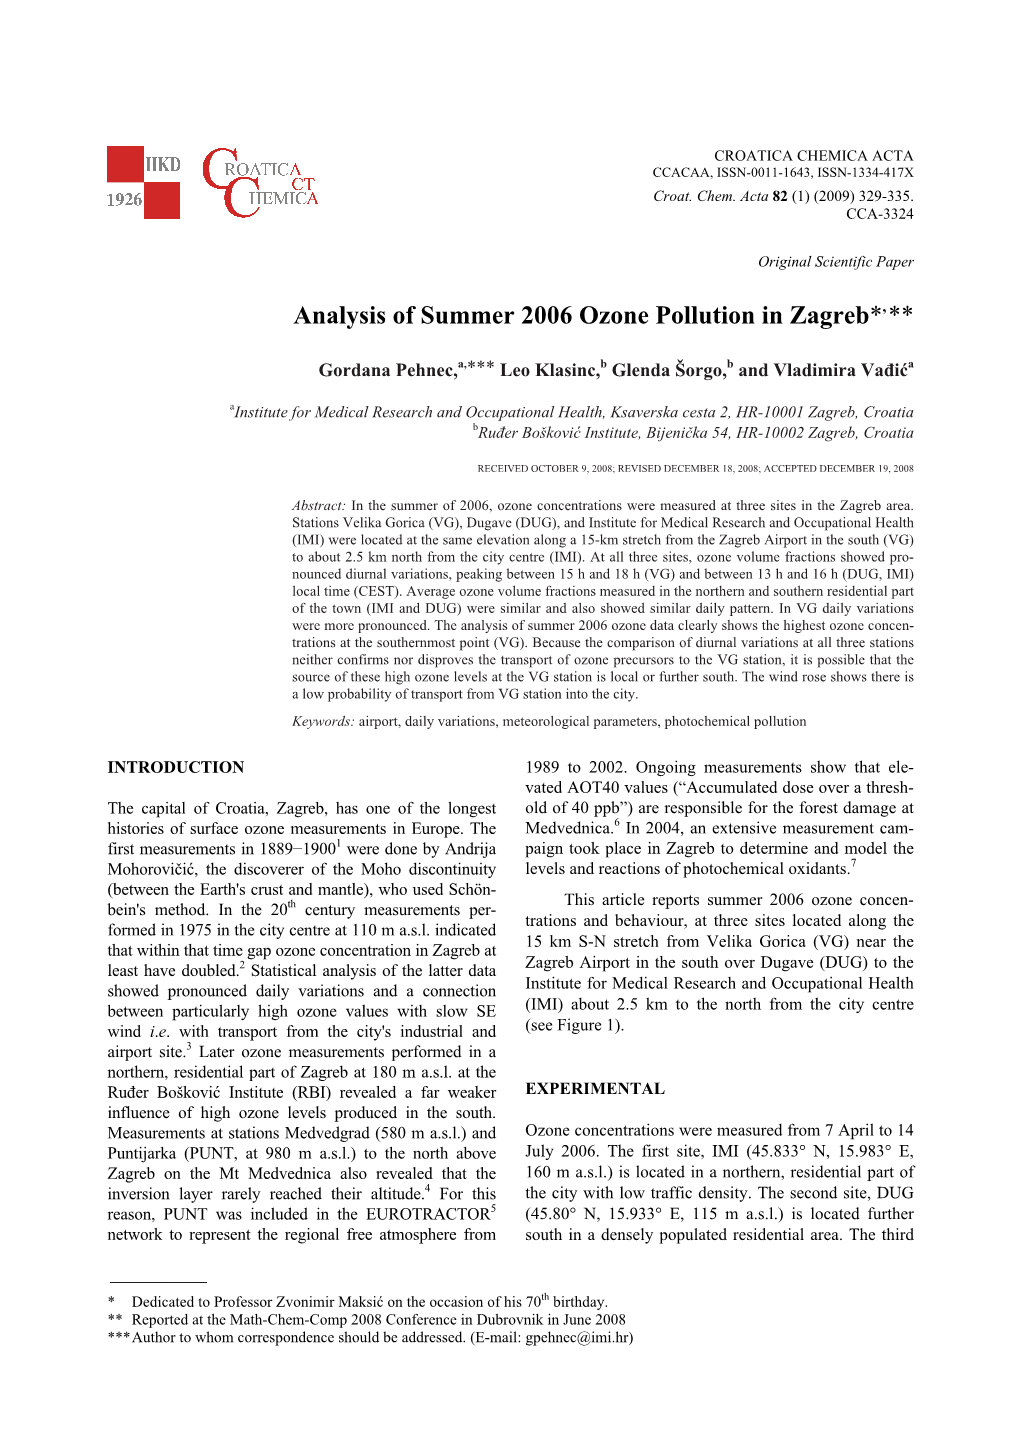 Analysis of Summer 2006 Ozone Pollution in Zagreb*,**